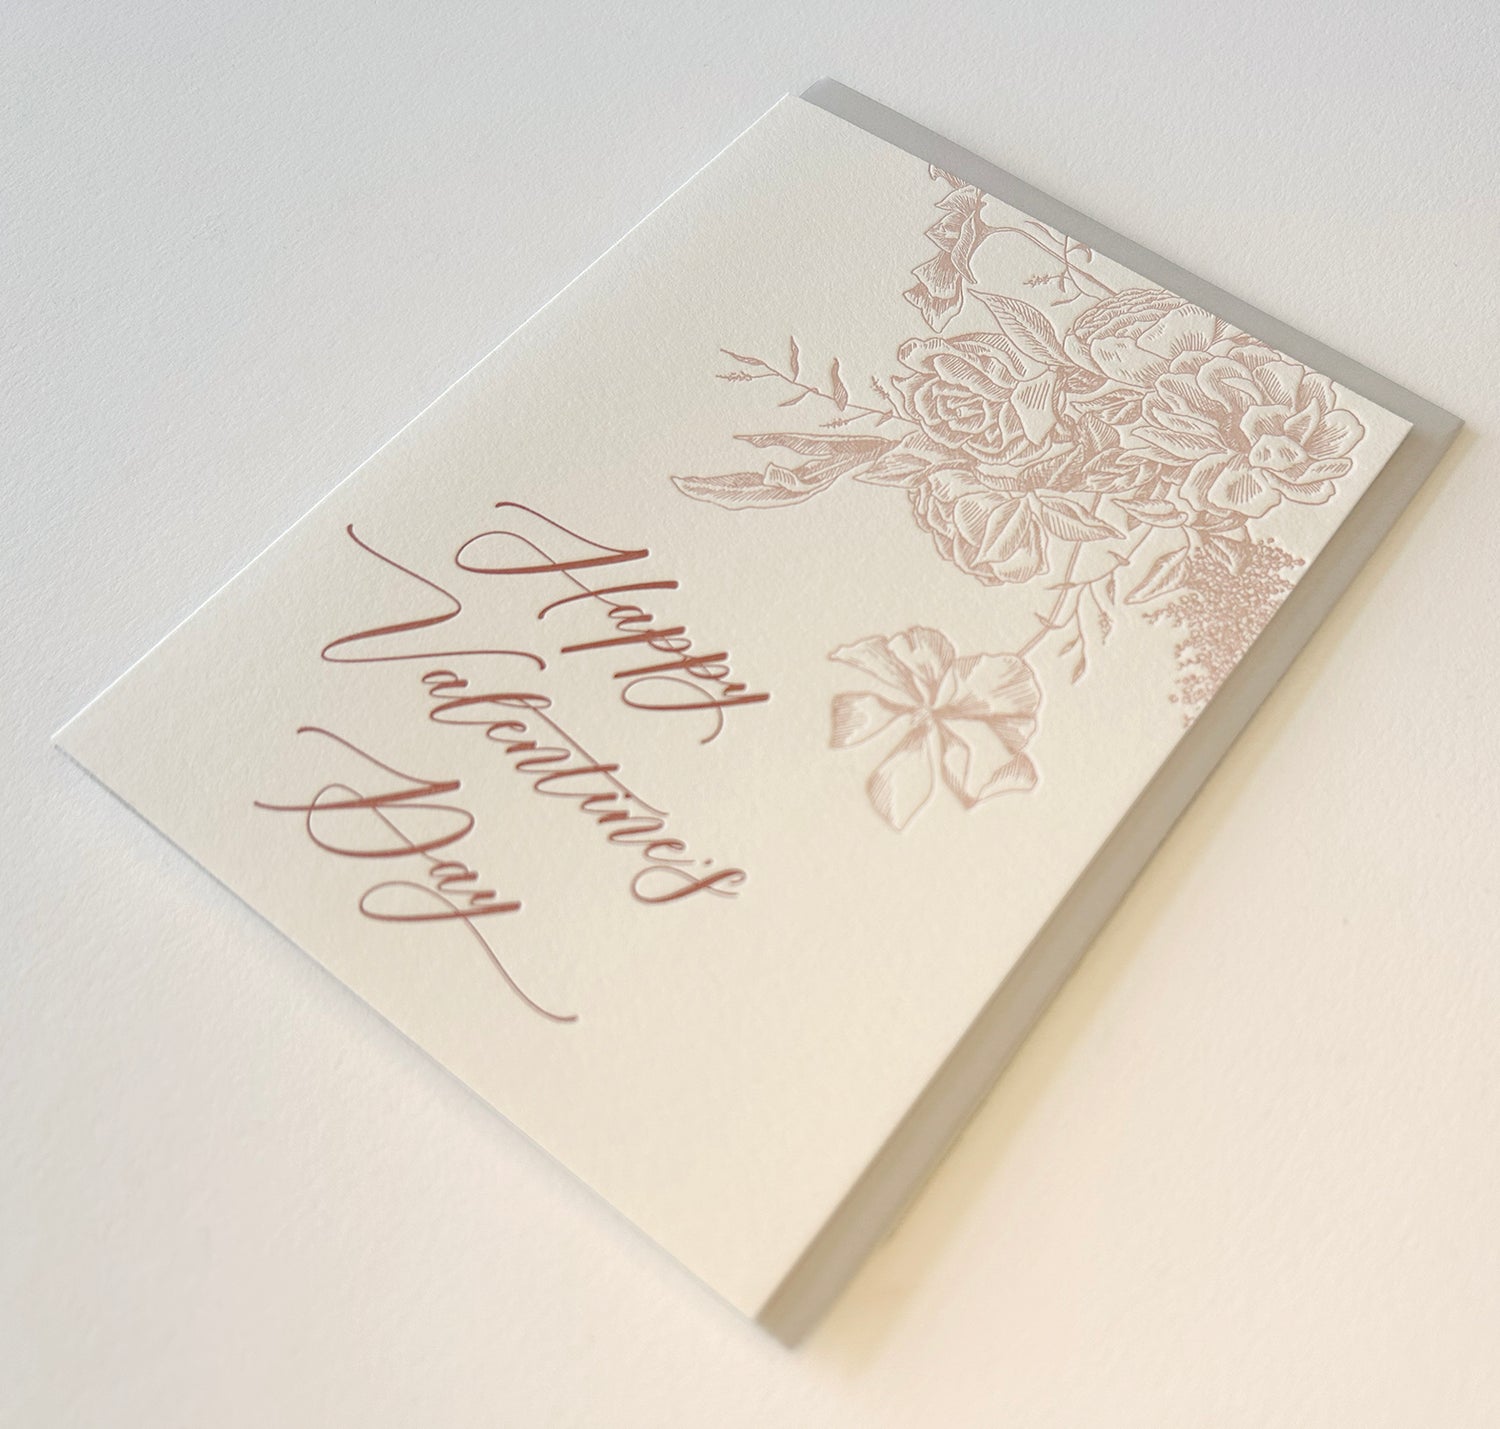 Letterpress love card with florals that says "Happy Valentine's Day" by Rust Belt Love